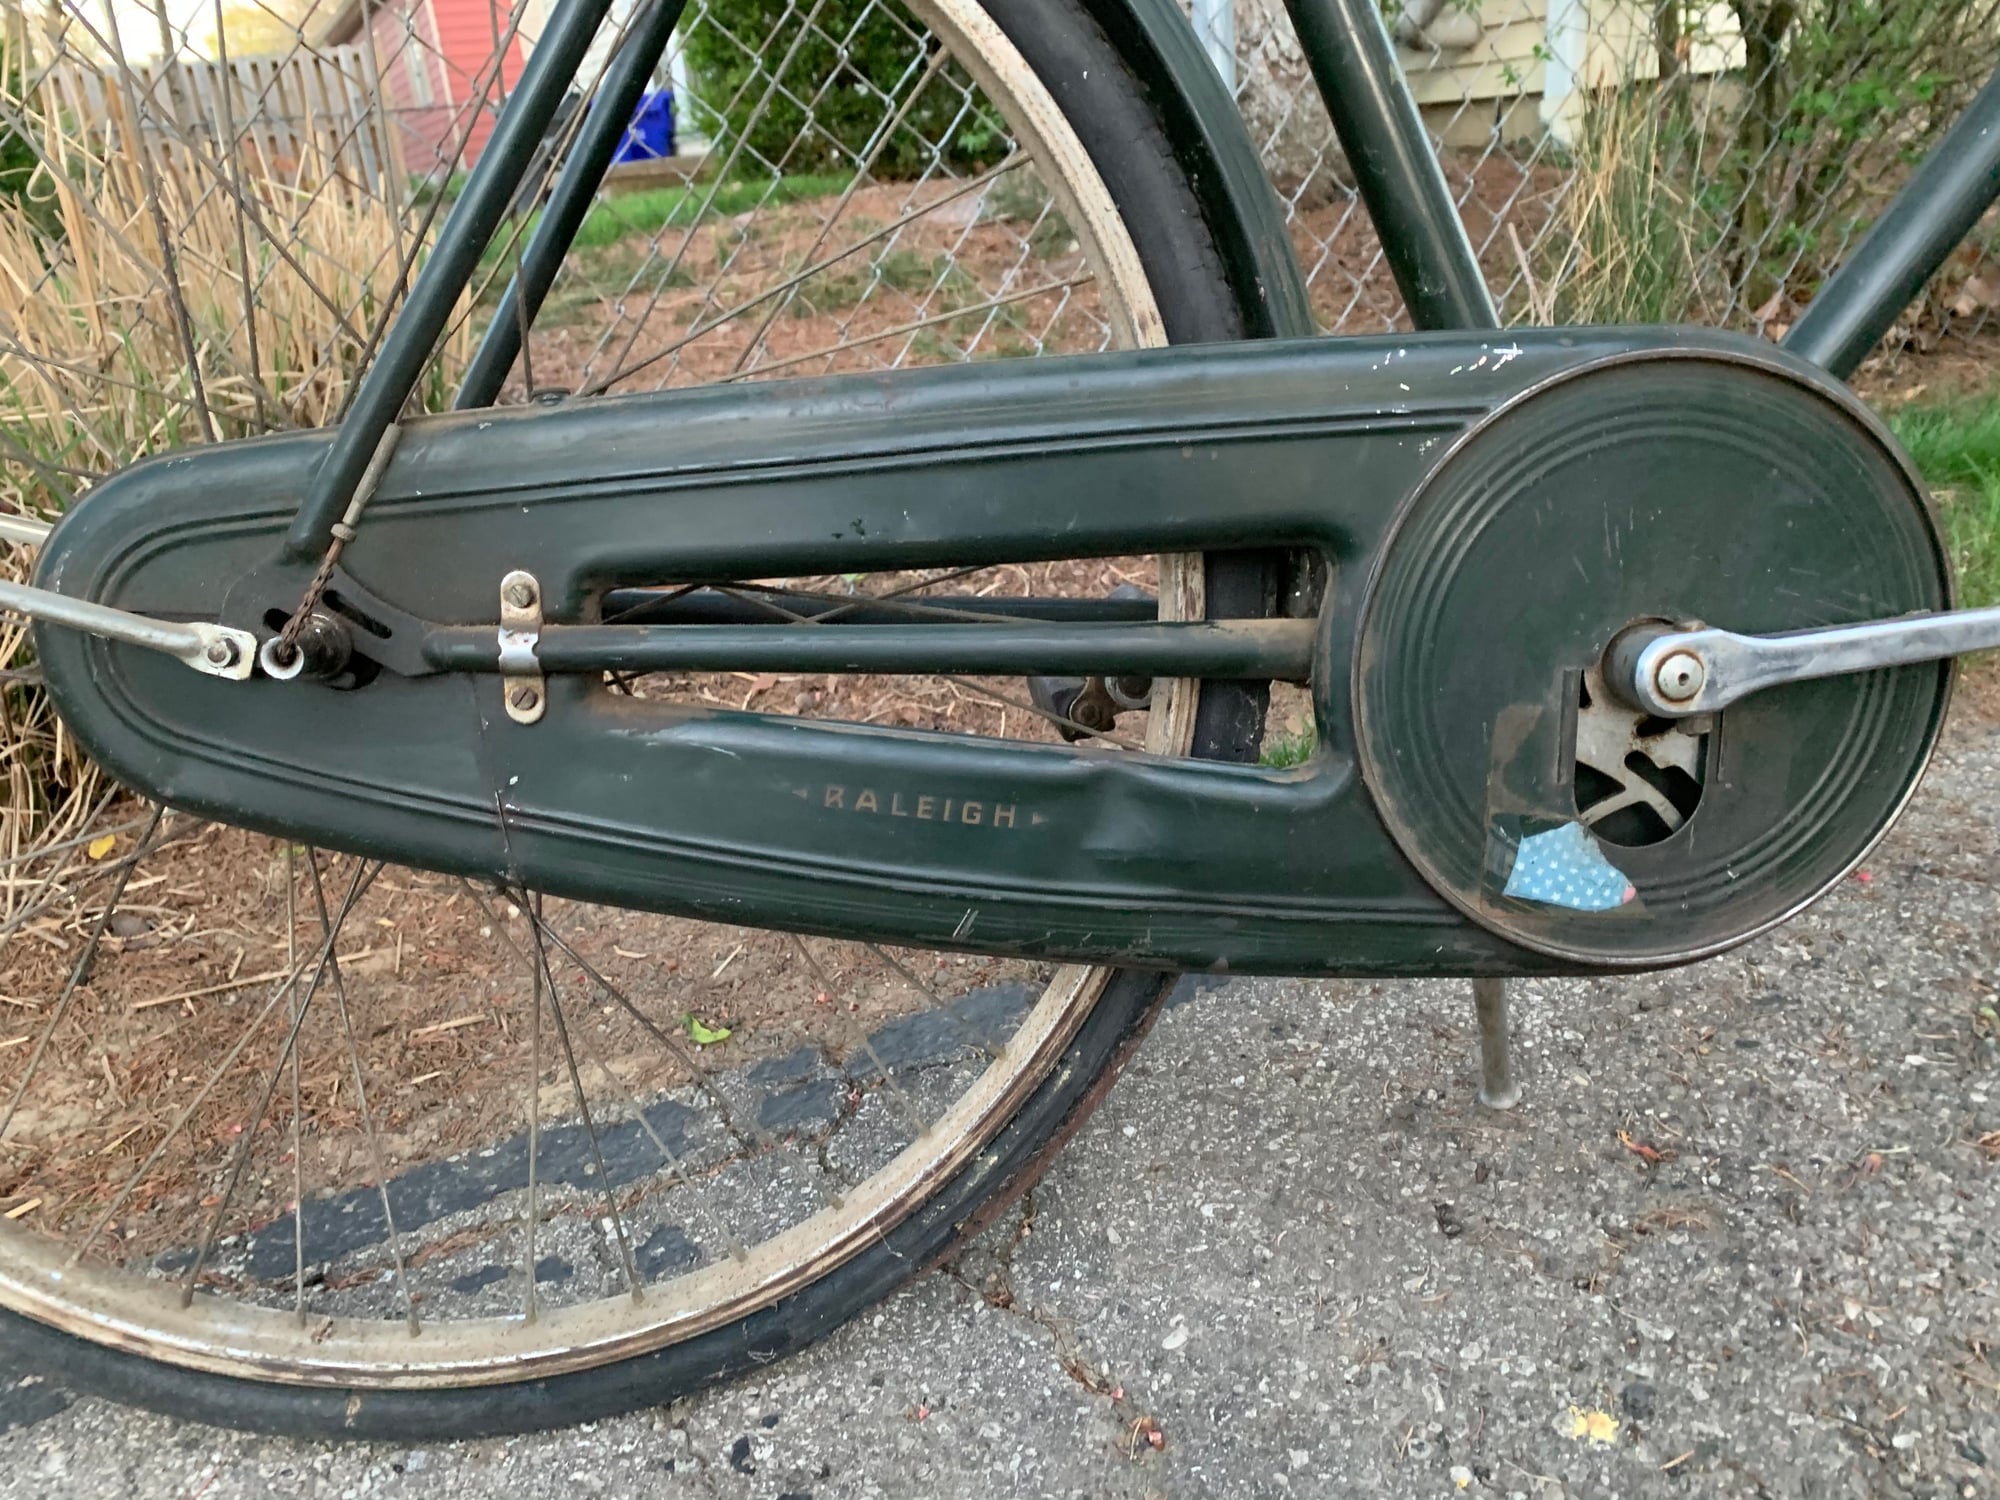 Unique Vintage Raleigh 3-Speed- What Model is This and What Should I Ask For it?